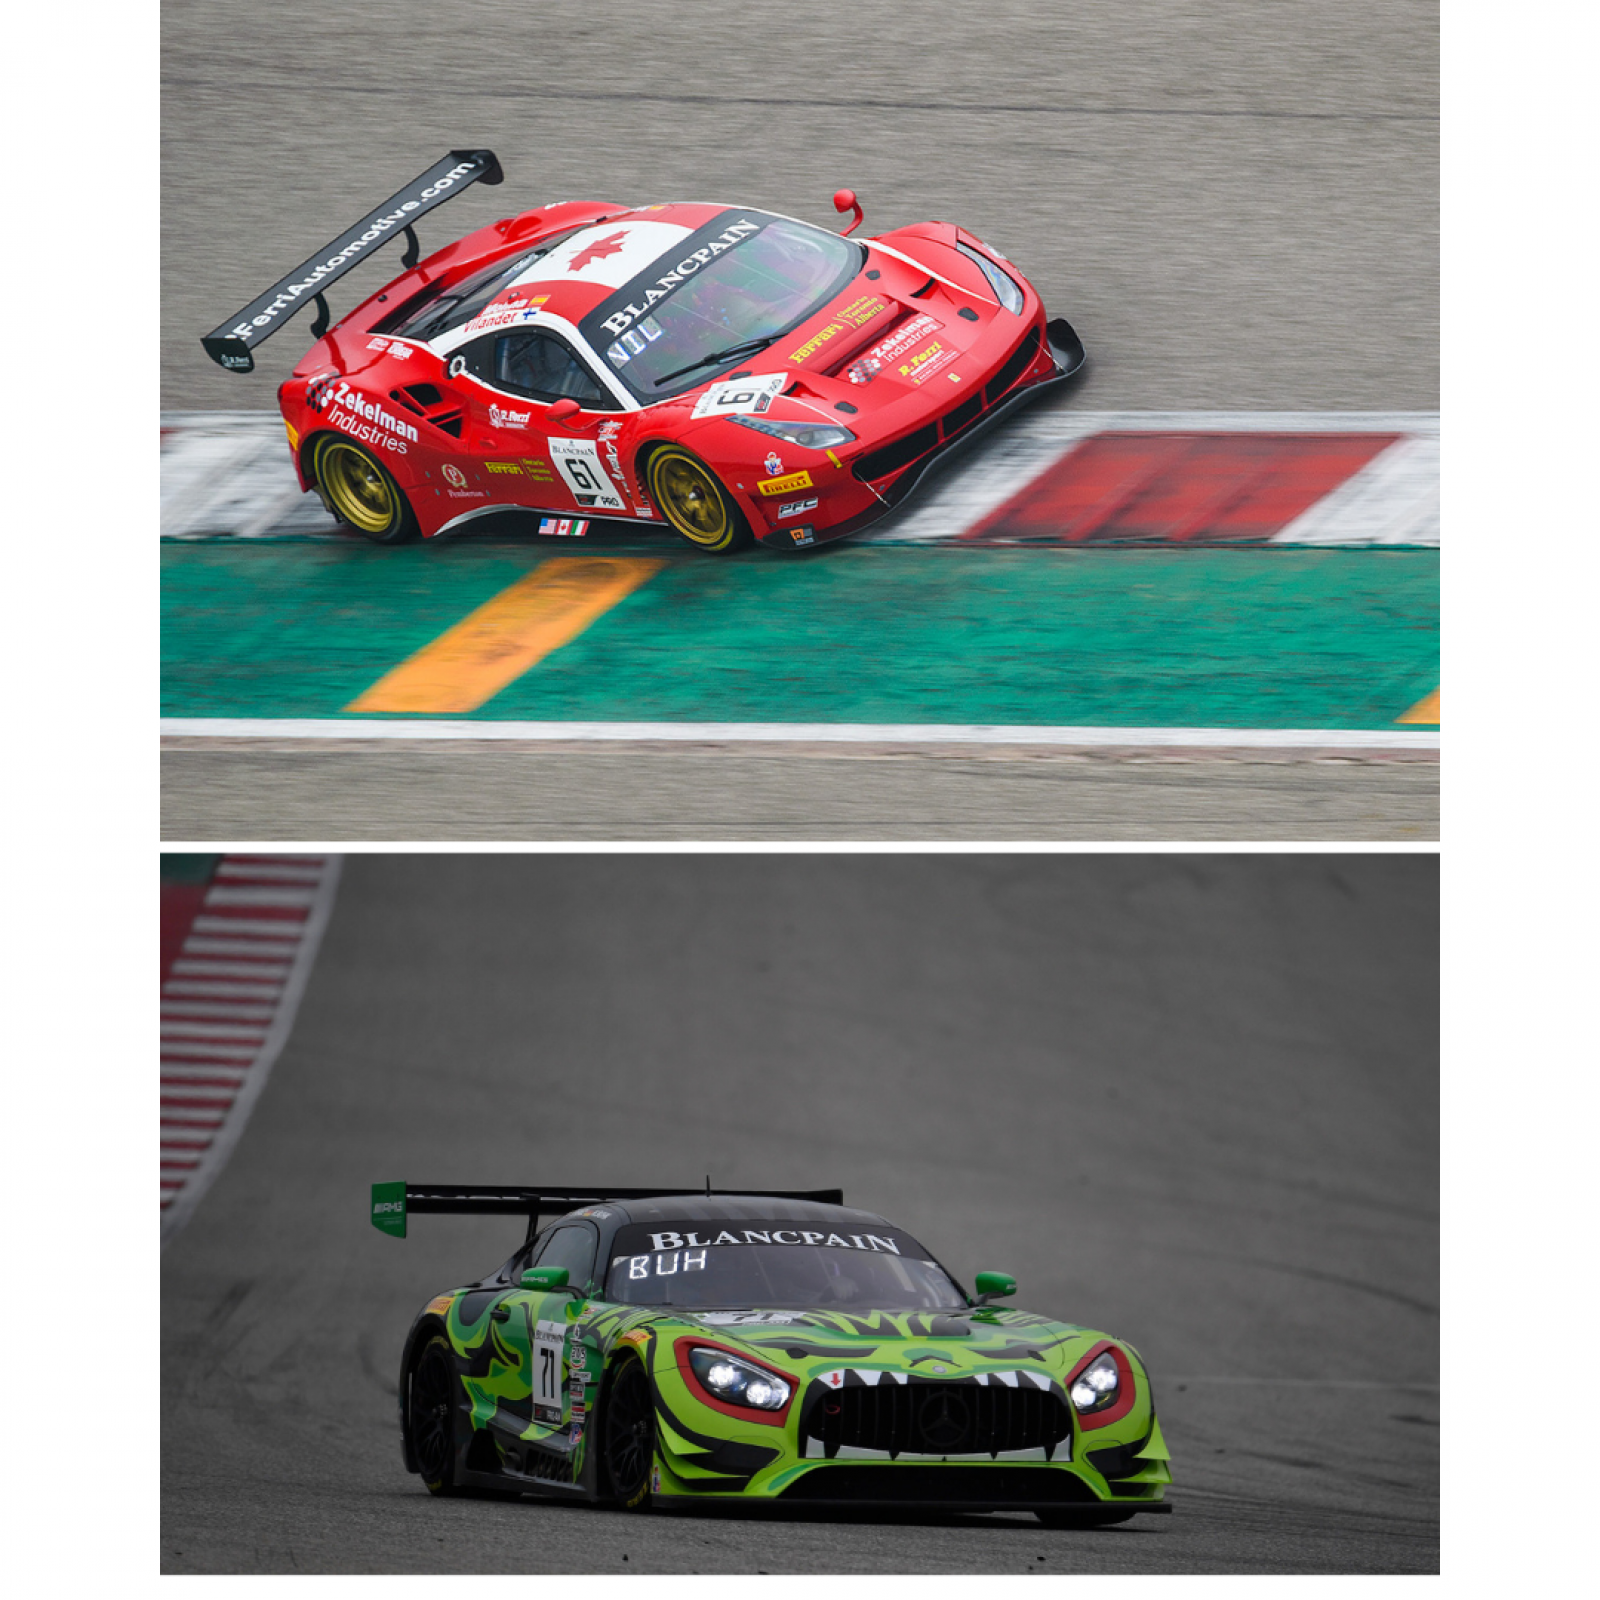  Ferrari and Mercedes-AMG commit to global Blancpain GT World Challenge